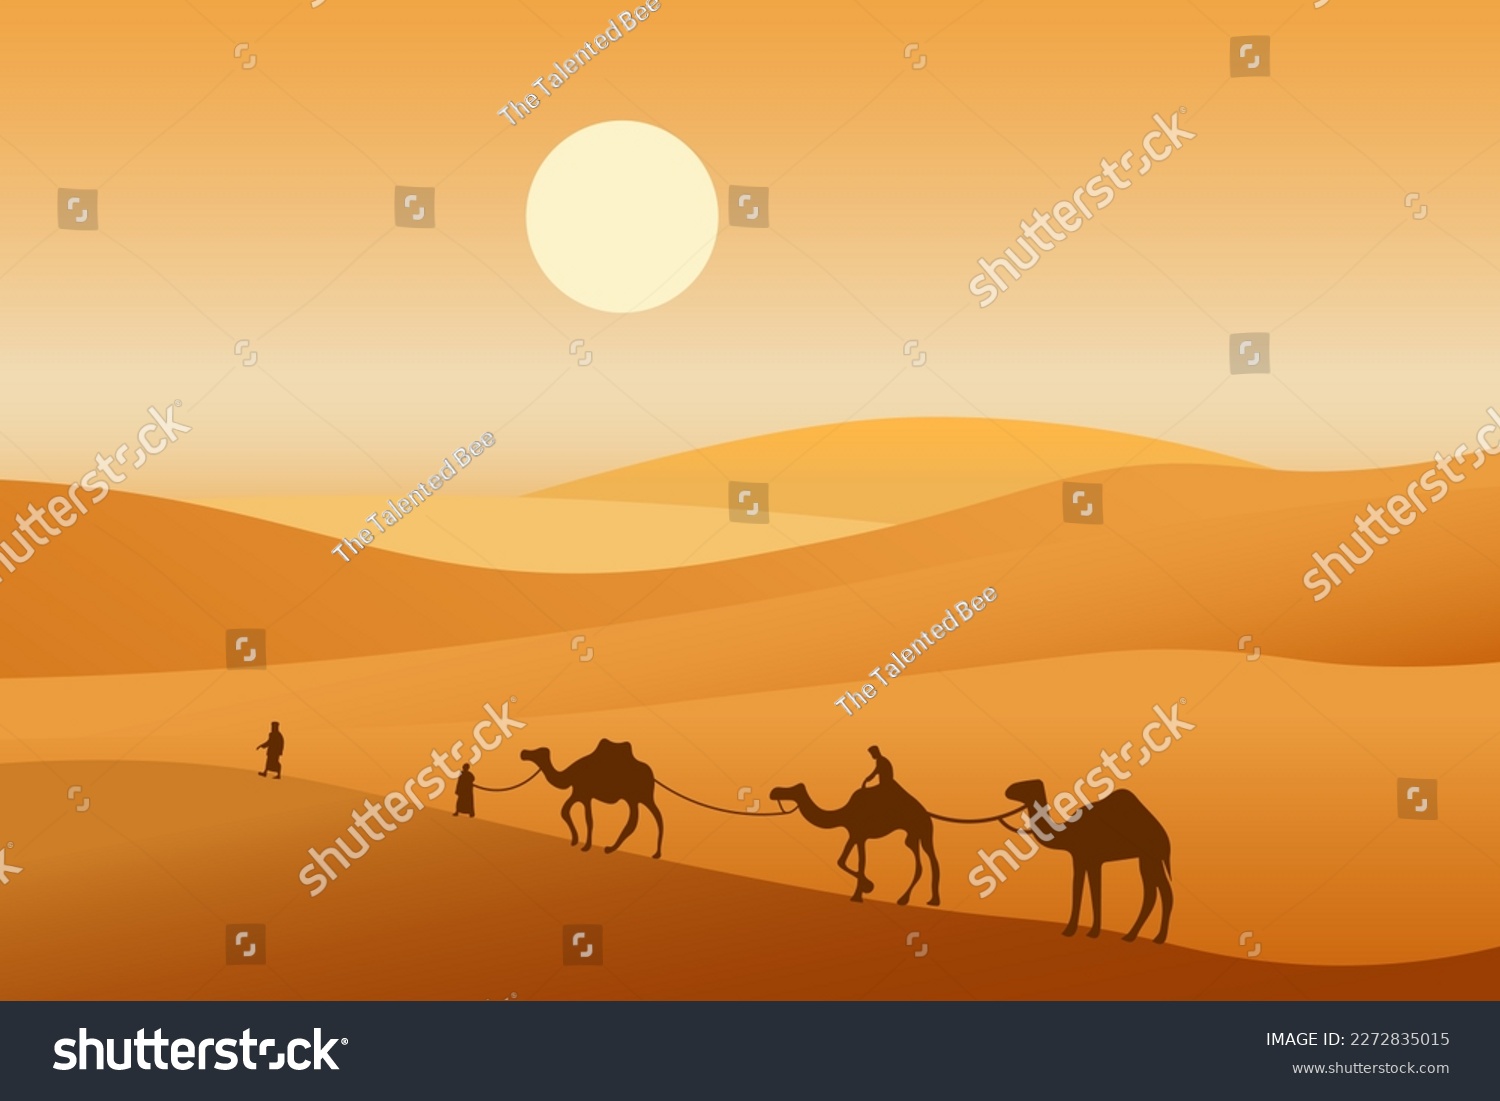 SVG of Camel caravan passing through the desert. African landscape. You can use for islamic background, banner, poster, website, social and print media. Vector illustration. svg